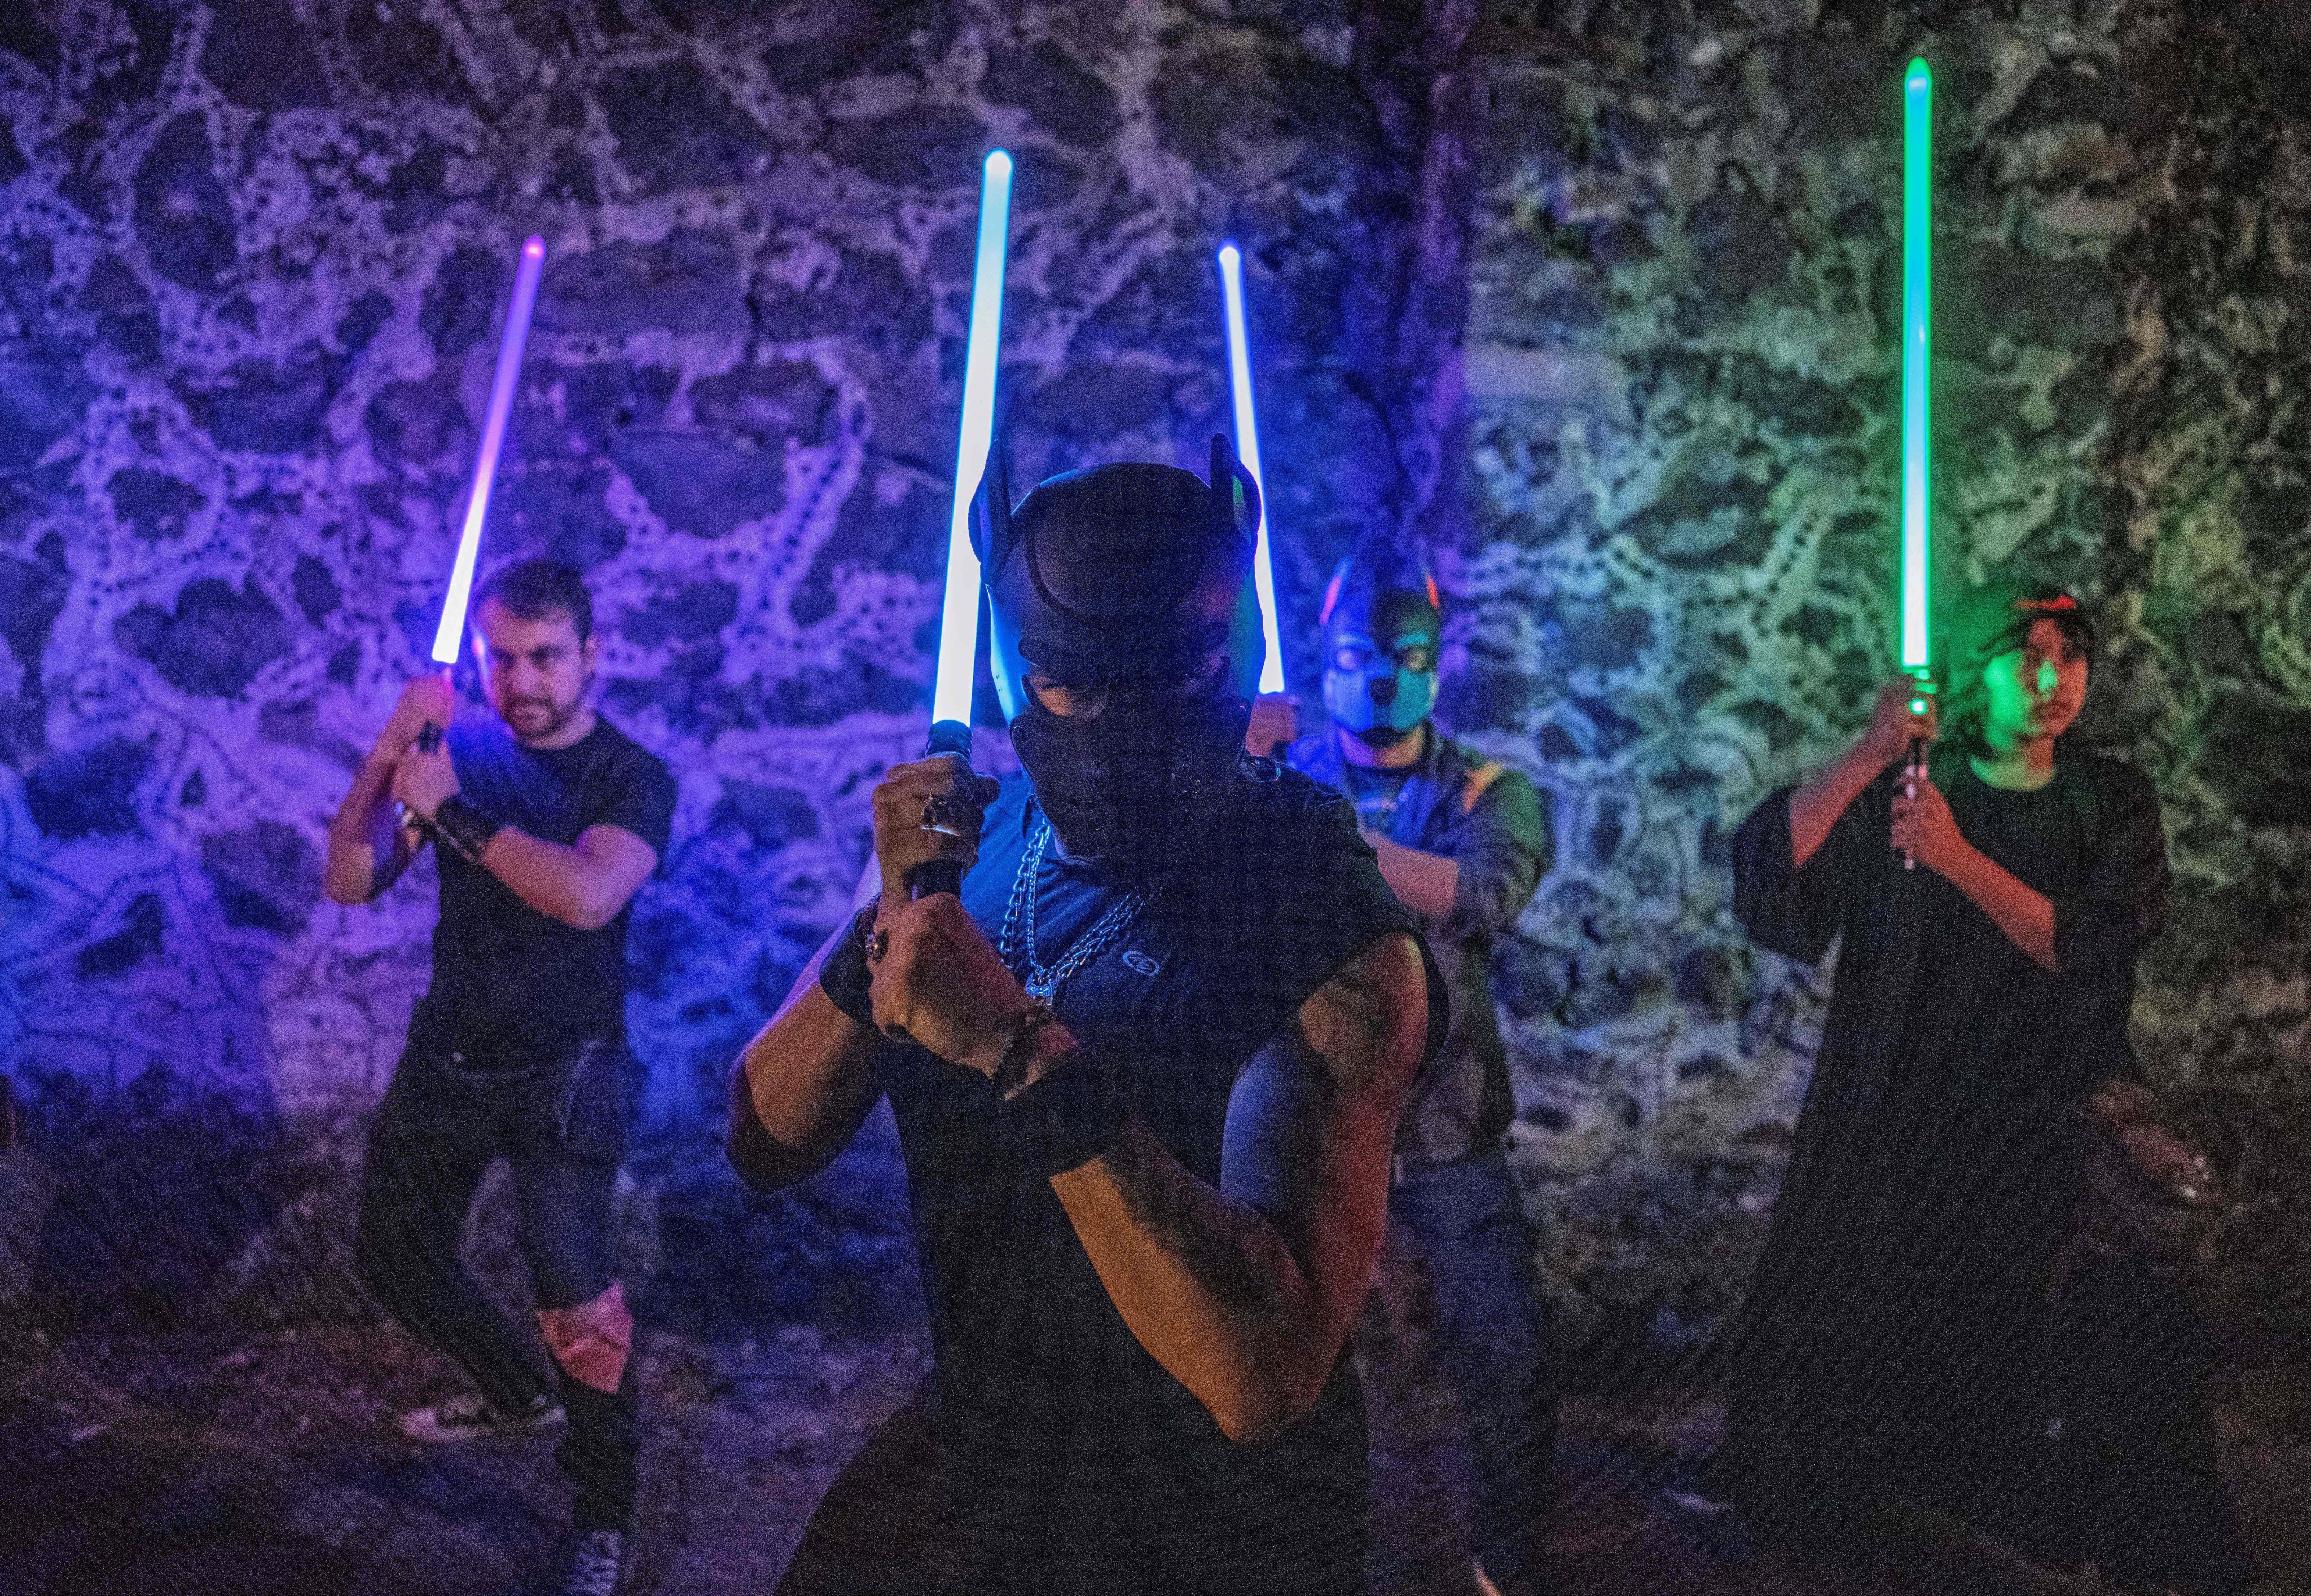 Members of the Jedi Knight Academy (JKAMX) hold lightsabers during training at a park in Mexico City. Photo: AFP